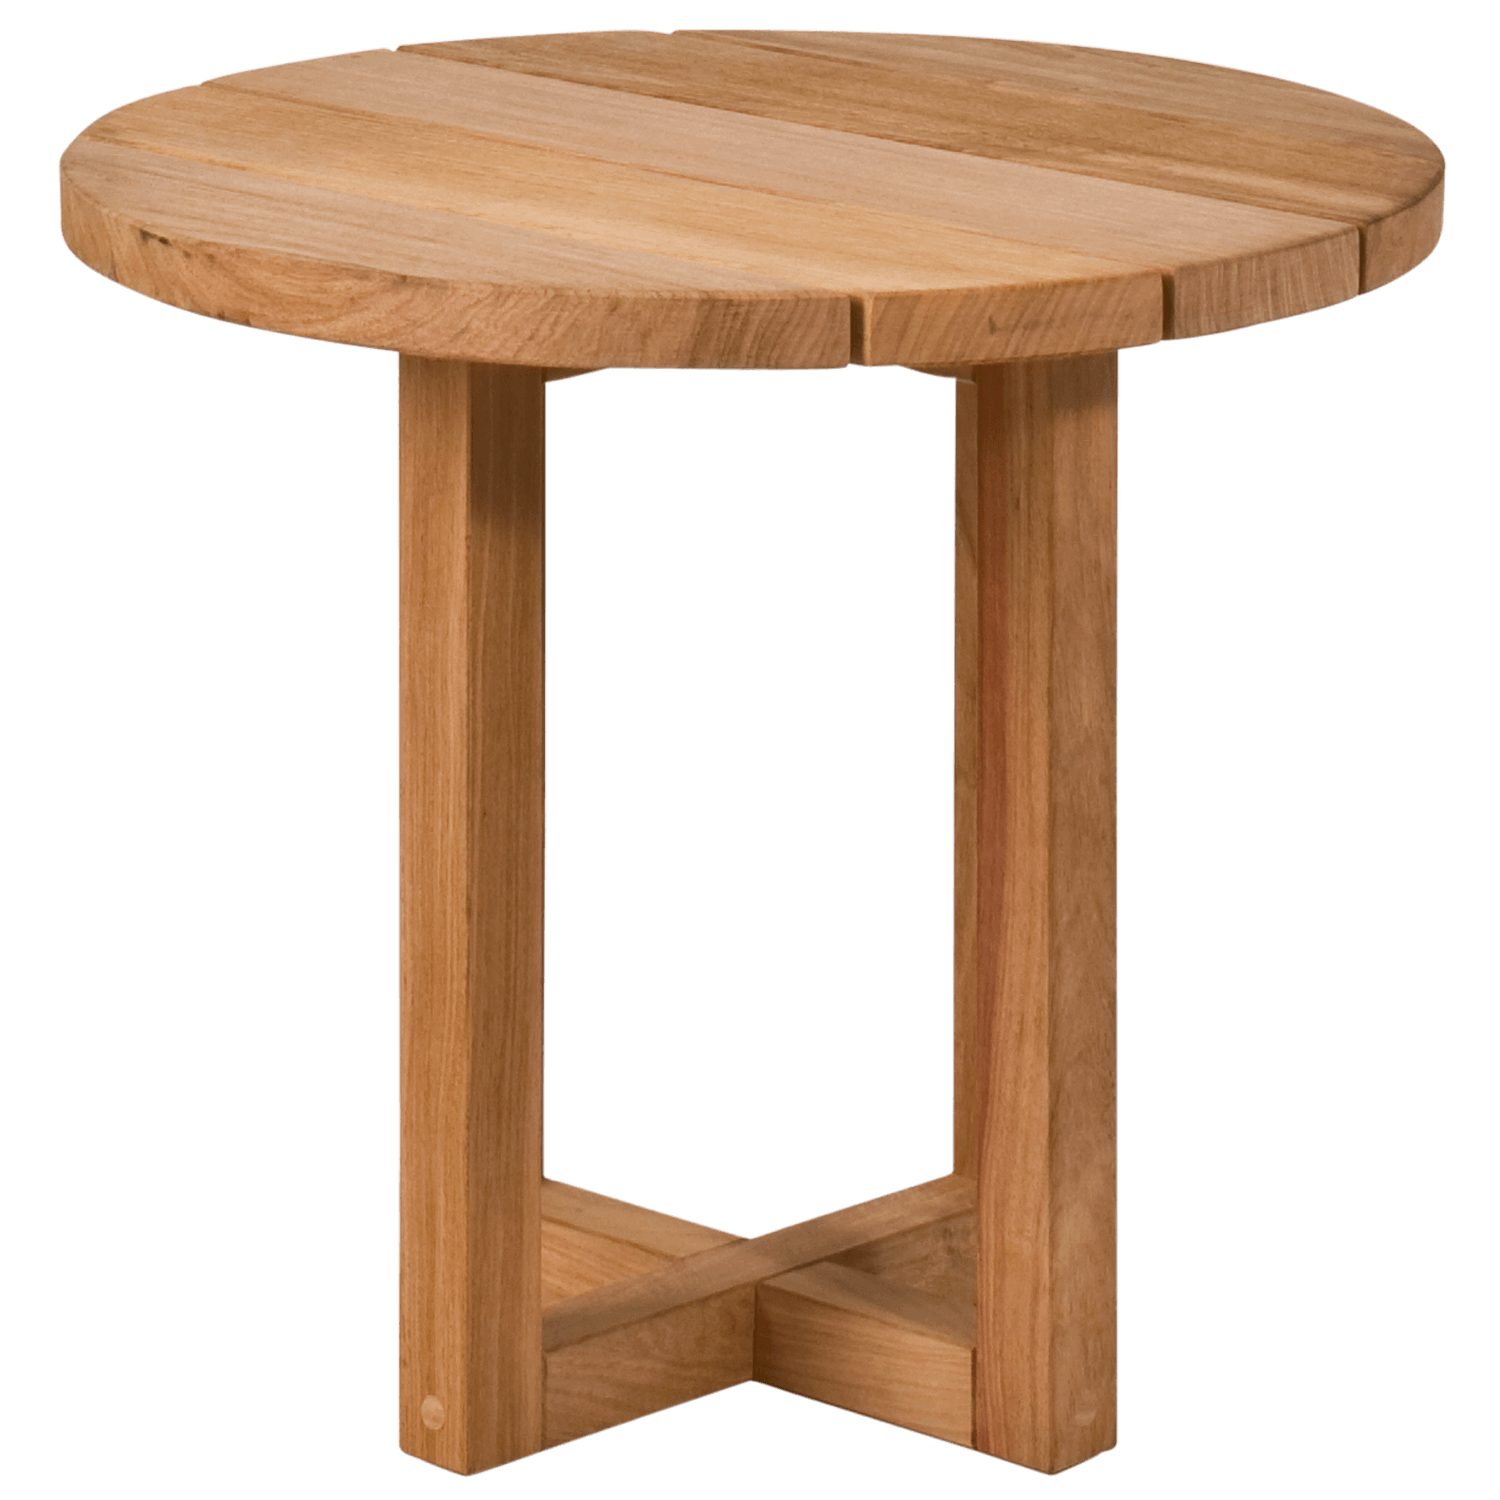 Coffee Table Image Free PNG HQ PNG Image